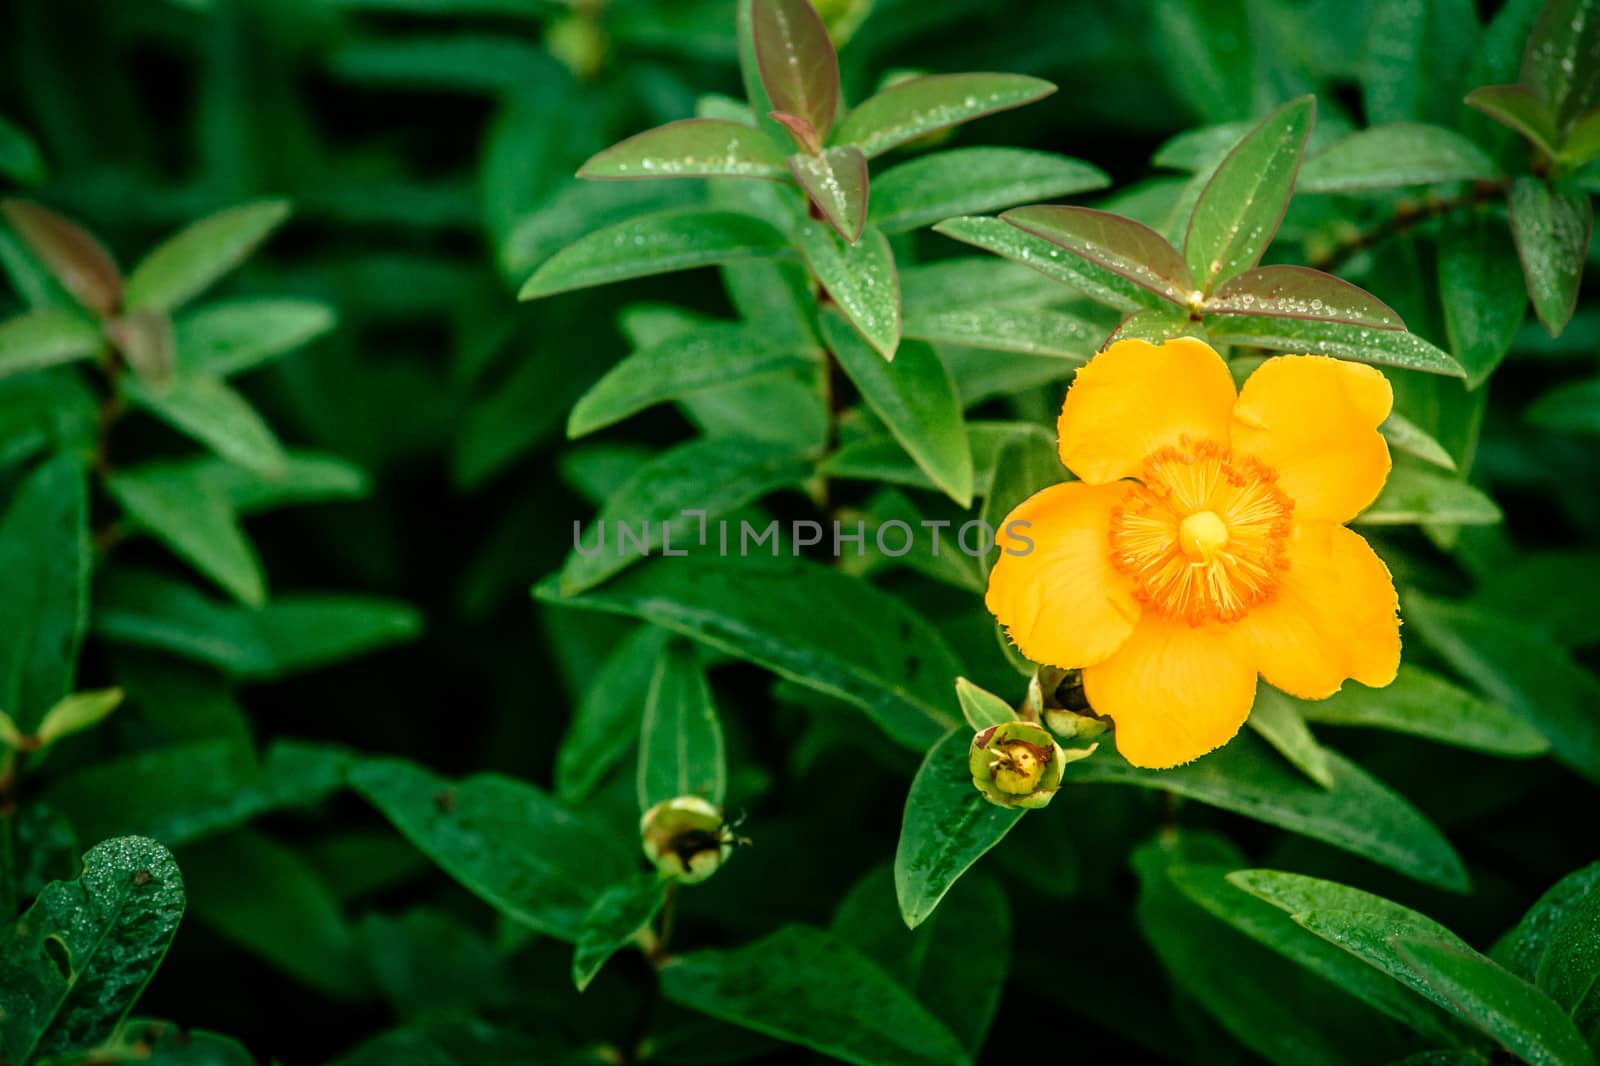 Yellow flower surrounded by green leafs